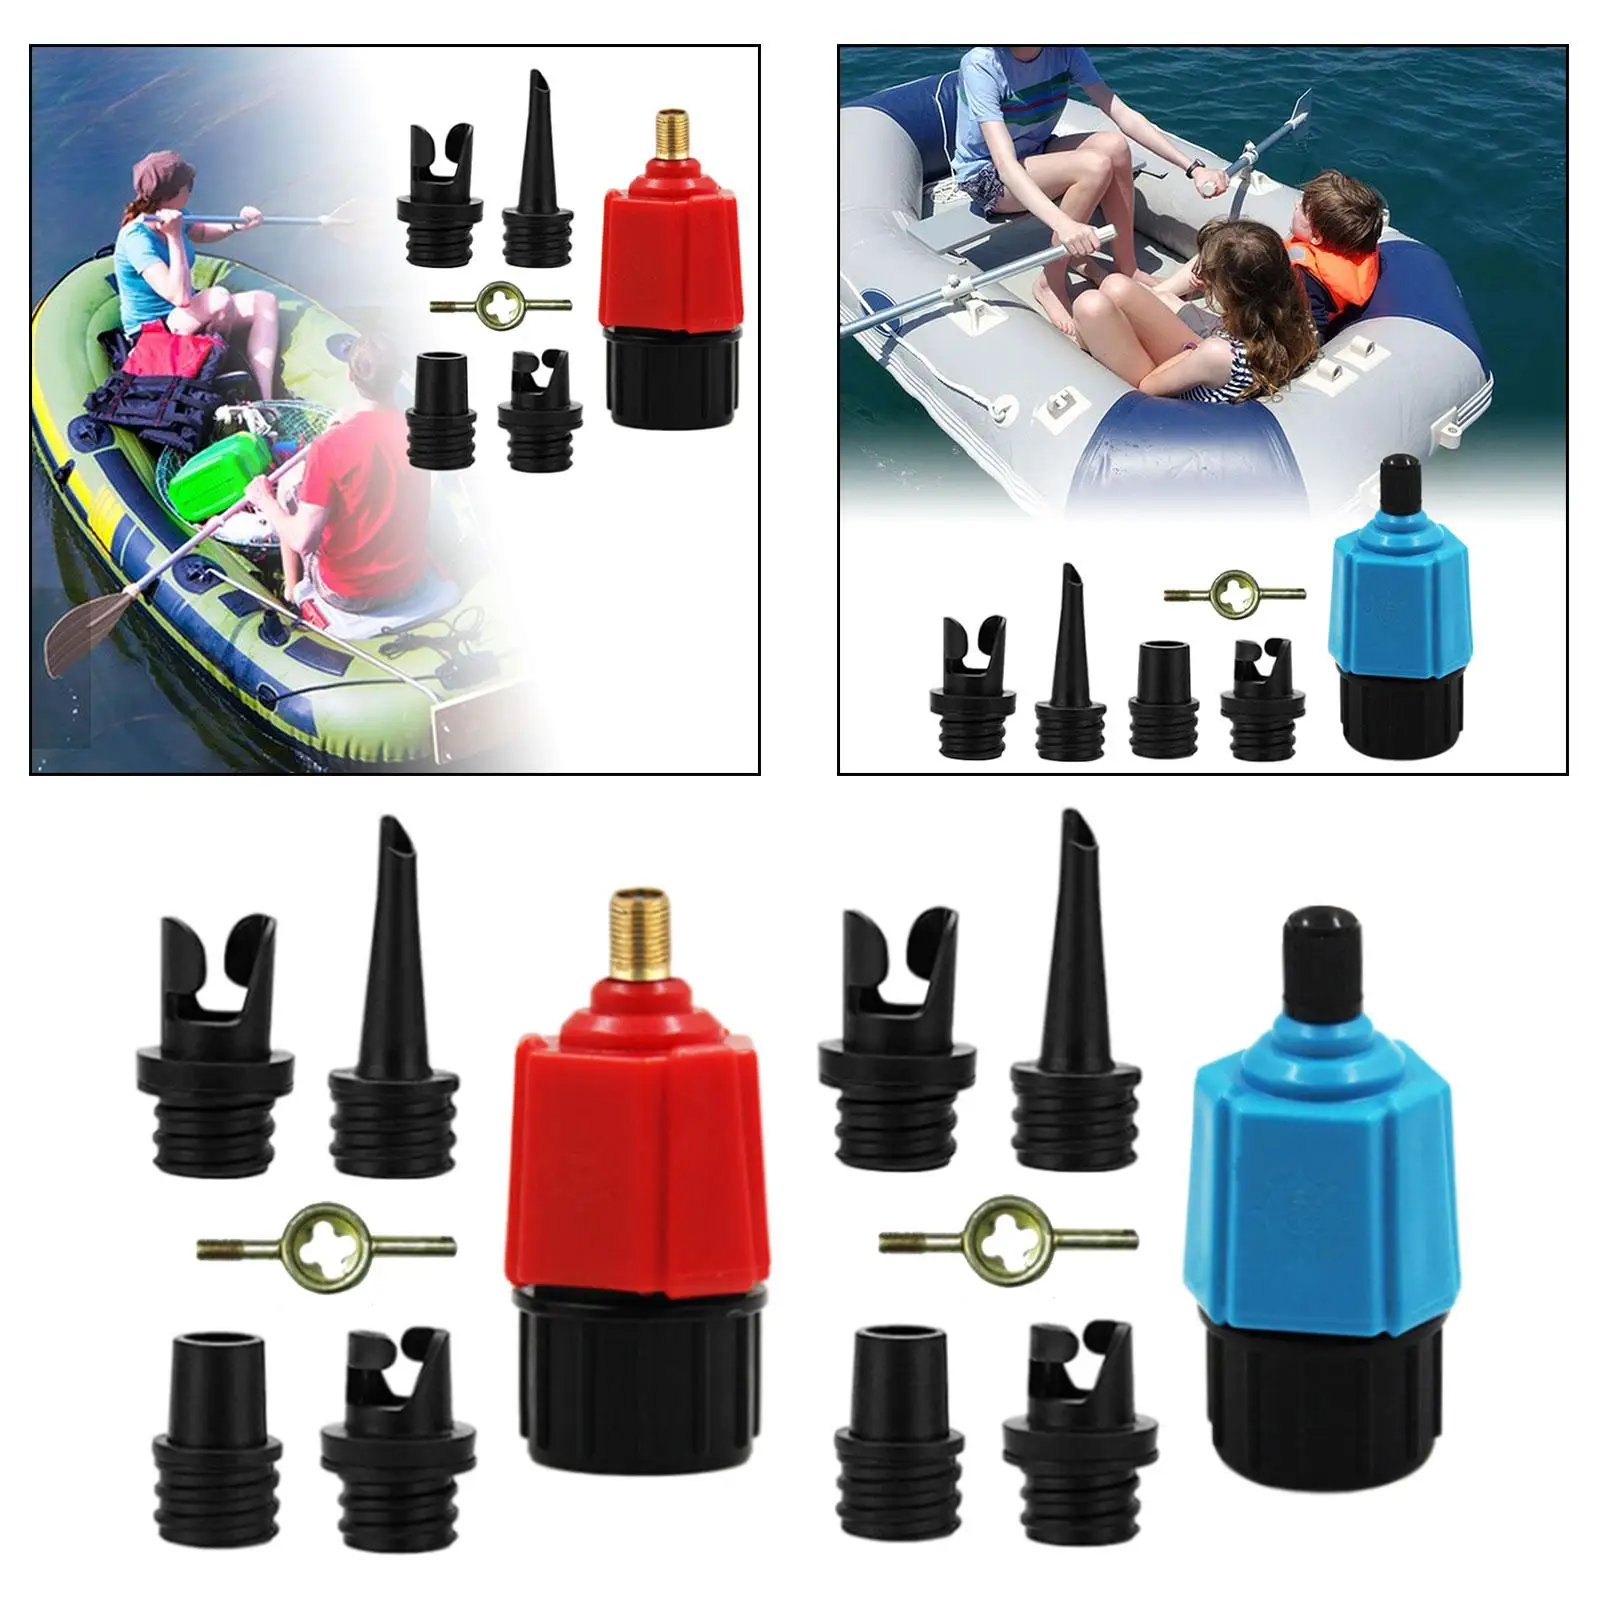 5x SUP Pump Adaptor Inflatable Boat SUP Compressor Paddle Board Pump Adapter